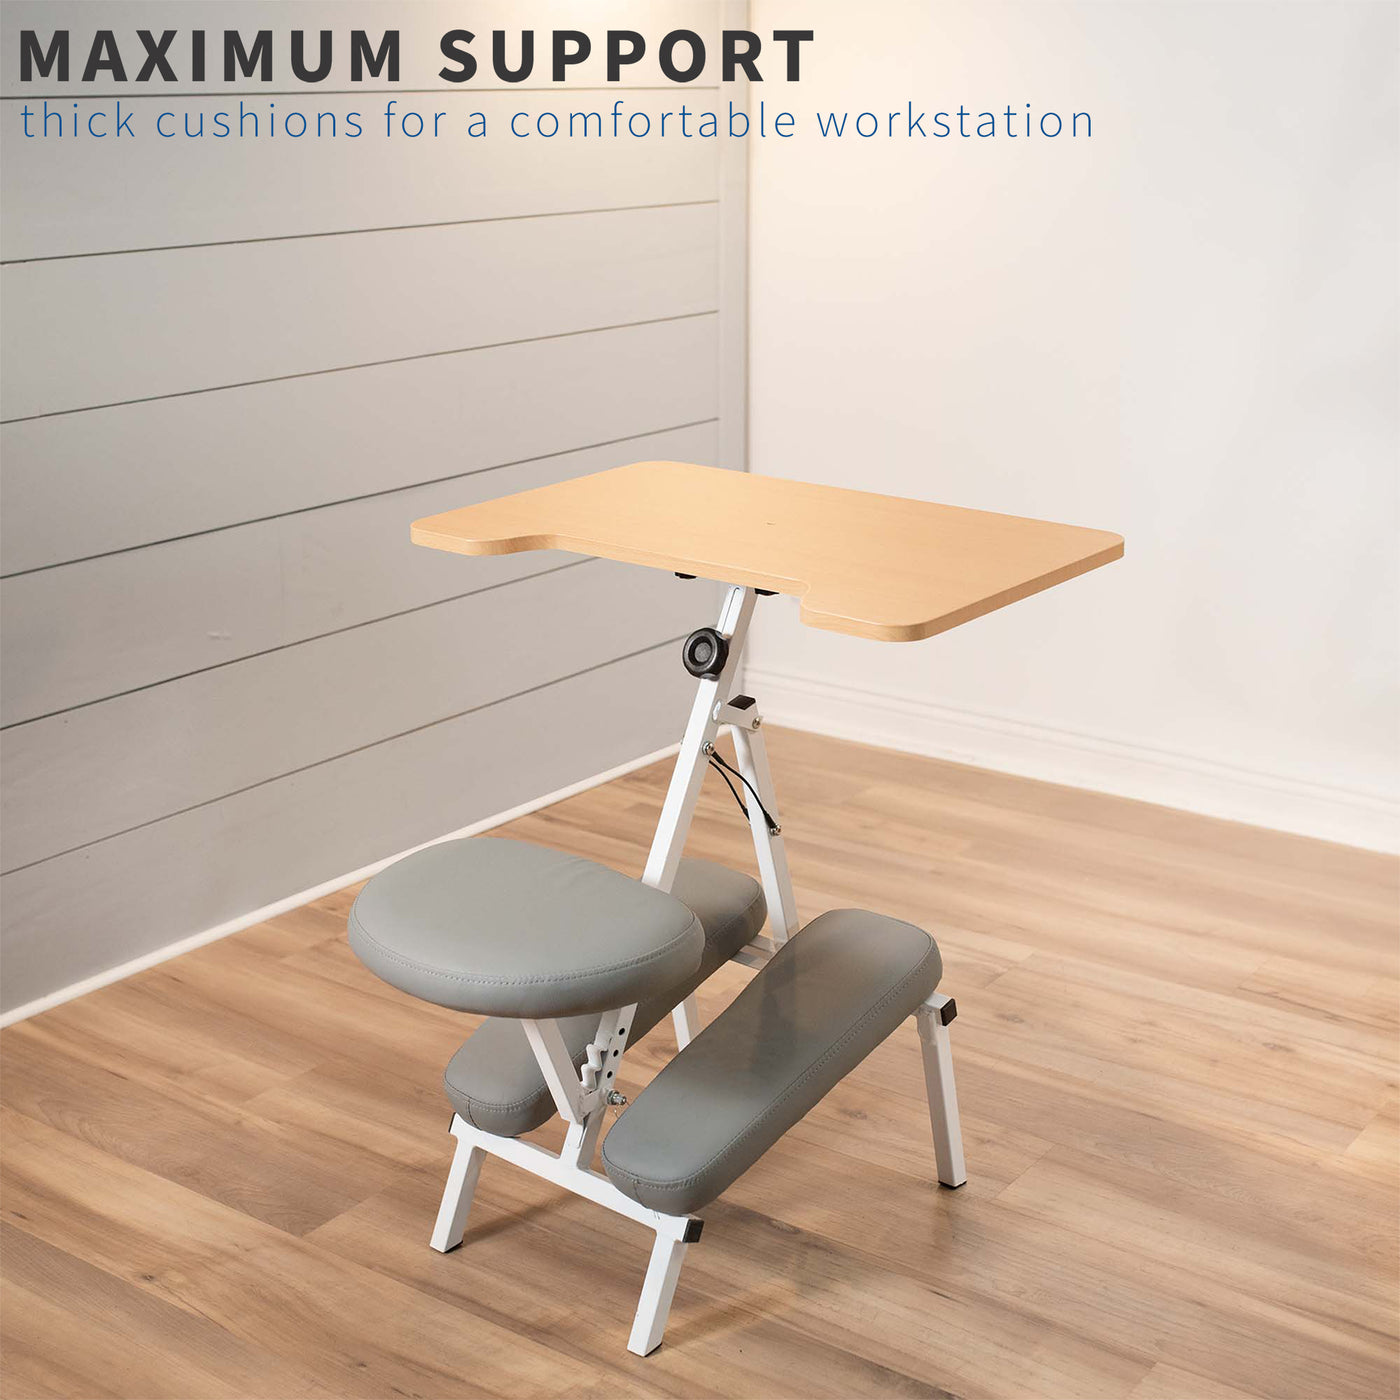 Sturdy kneeling chair desk for back support and comfortable workstation.